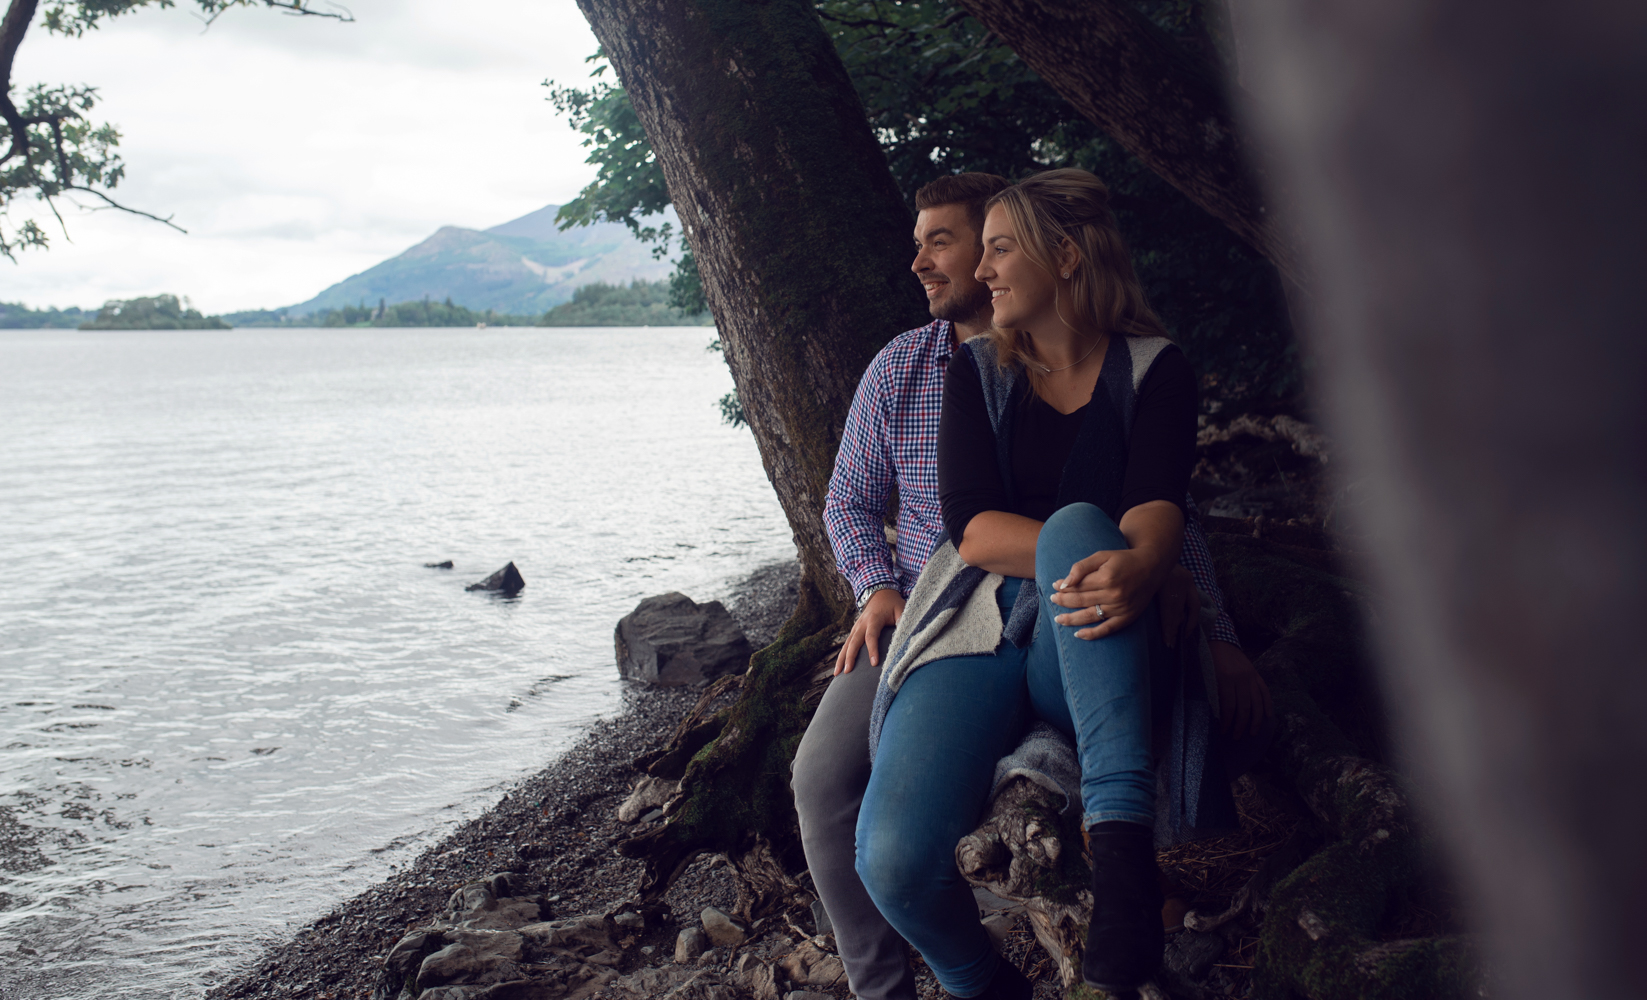 Pre shoot - A couple sitting on a fallen log on the shores of Derwent water in the Lake District